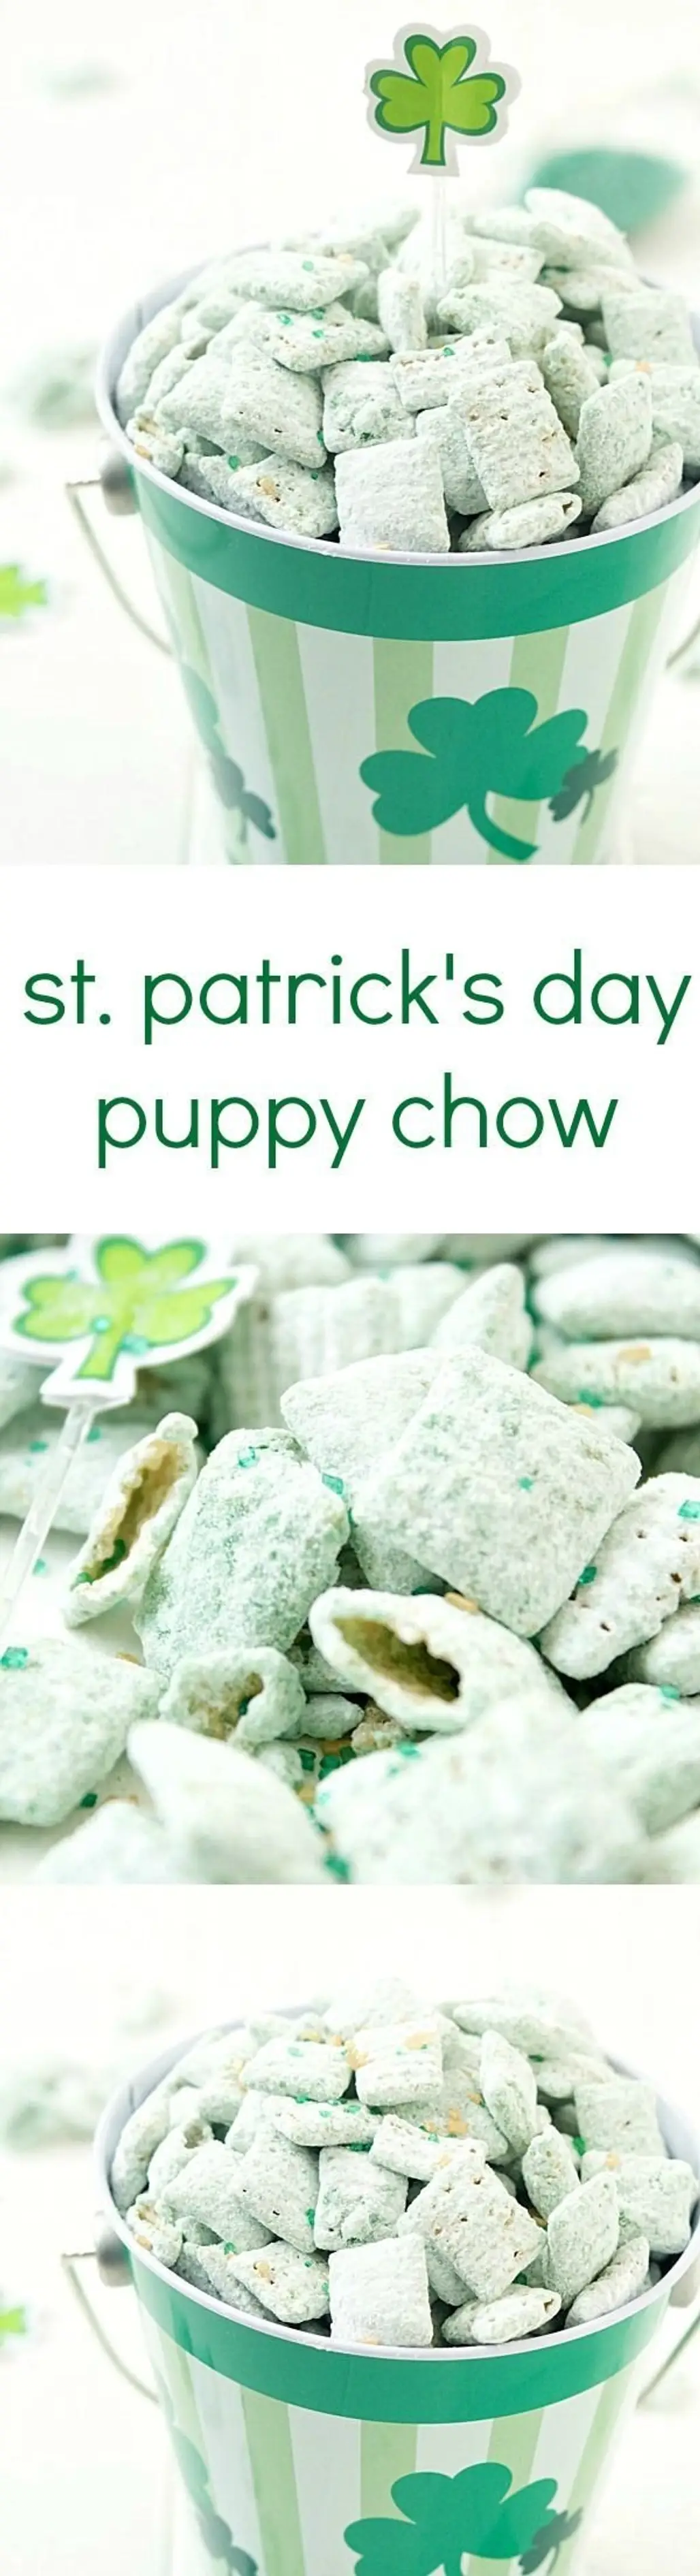 St. Patrick's Day Puppy Chow